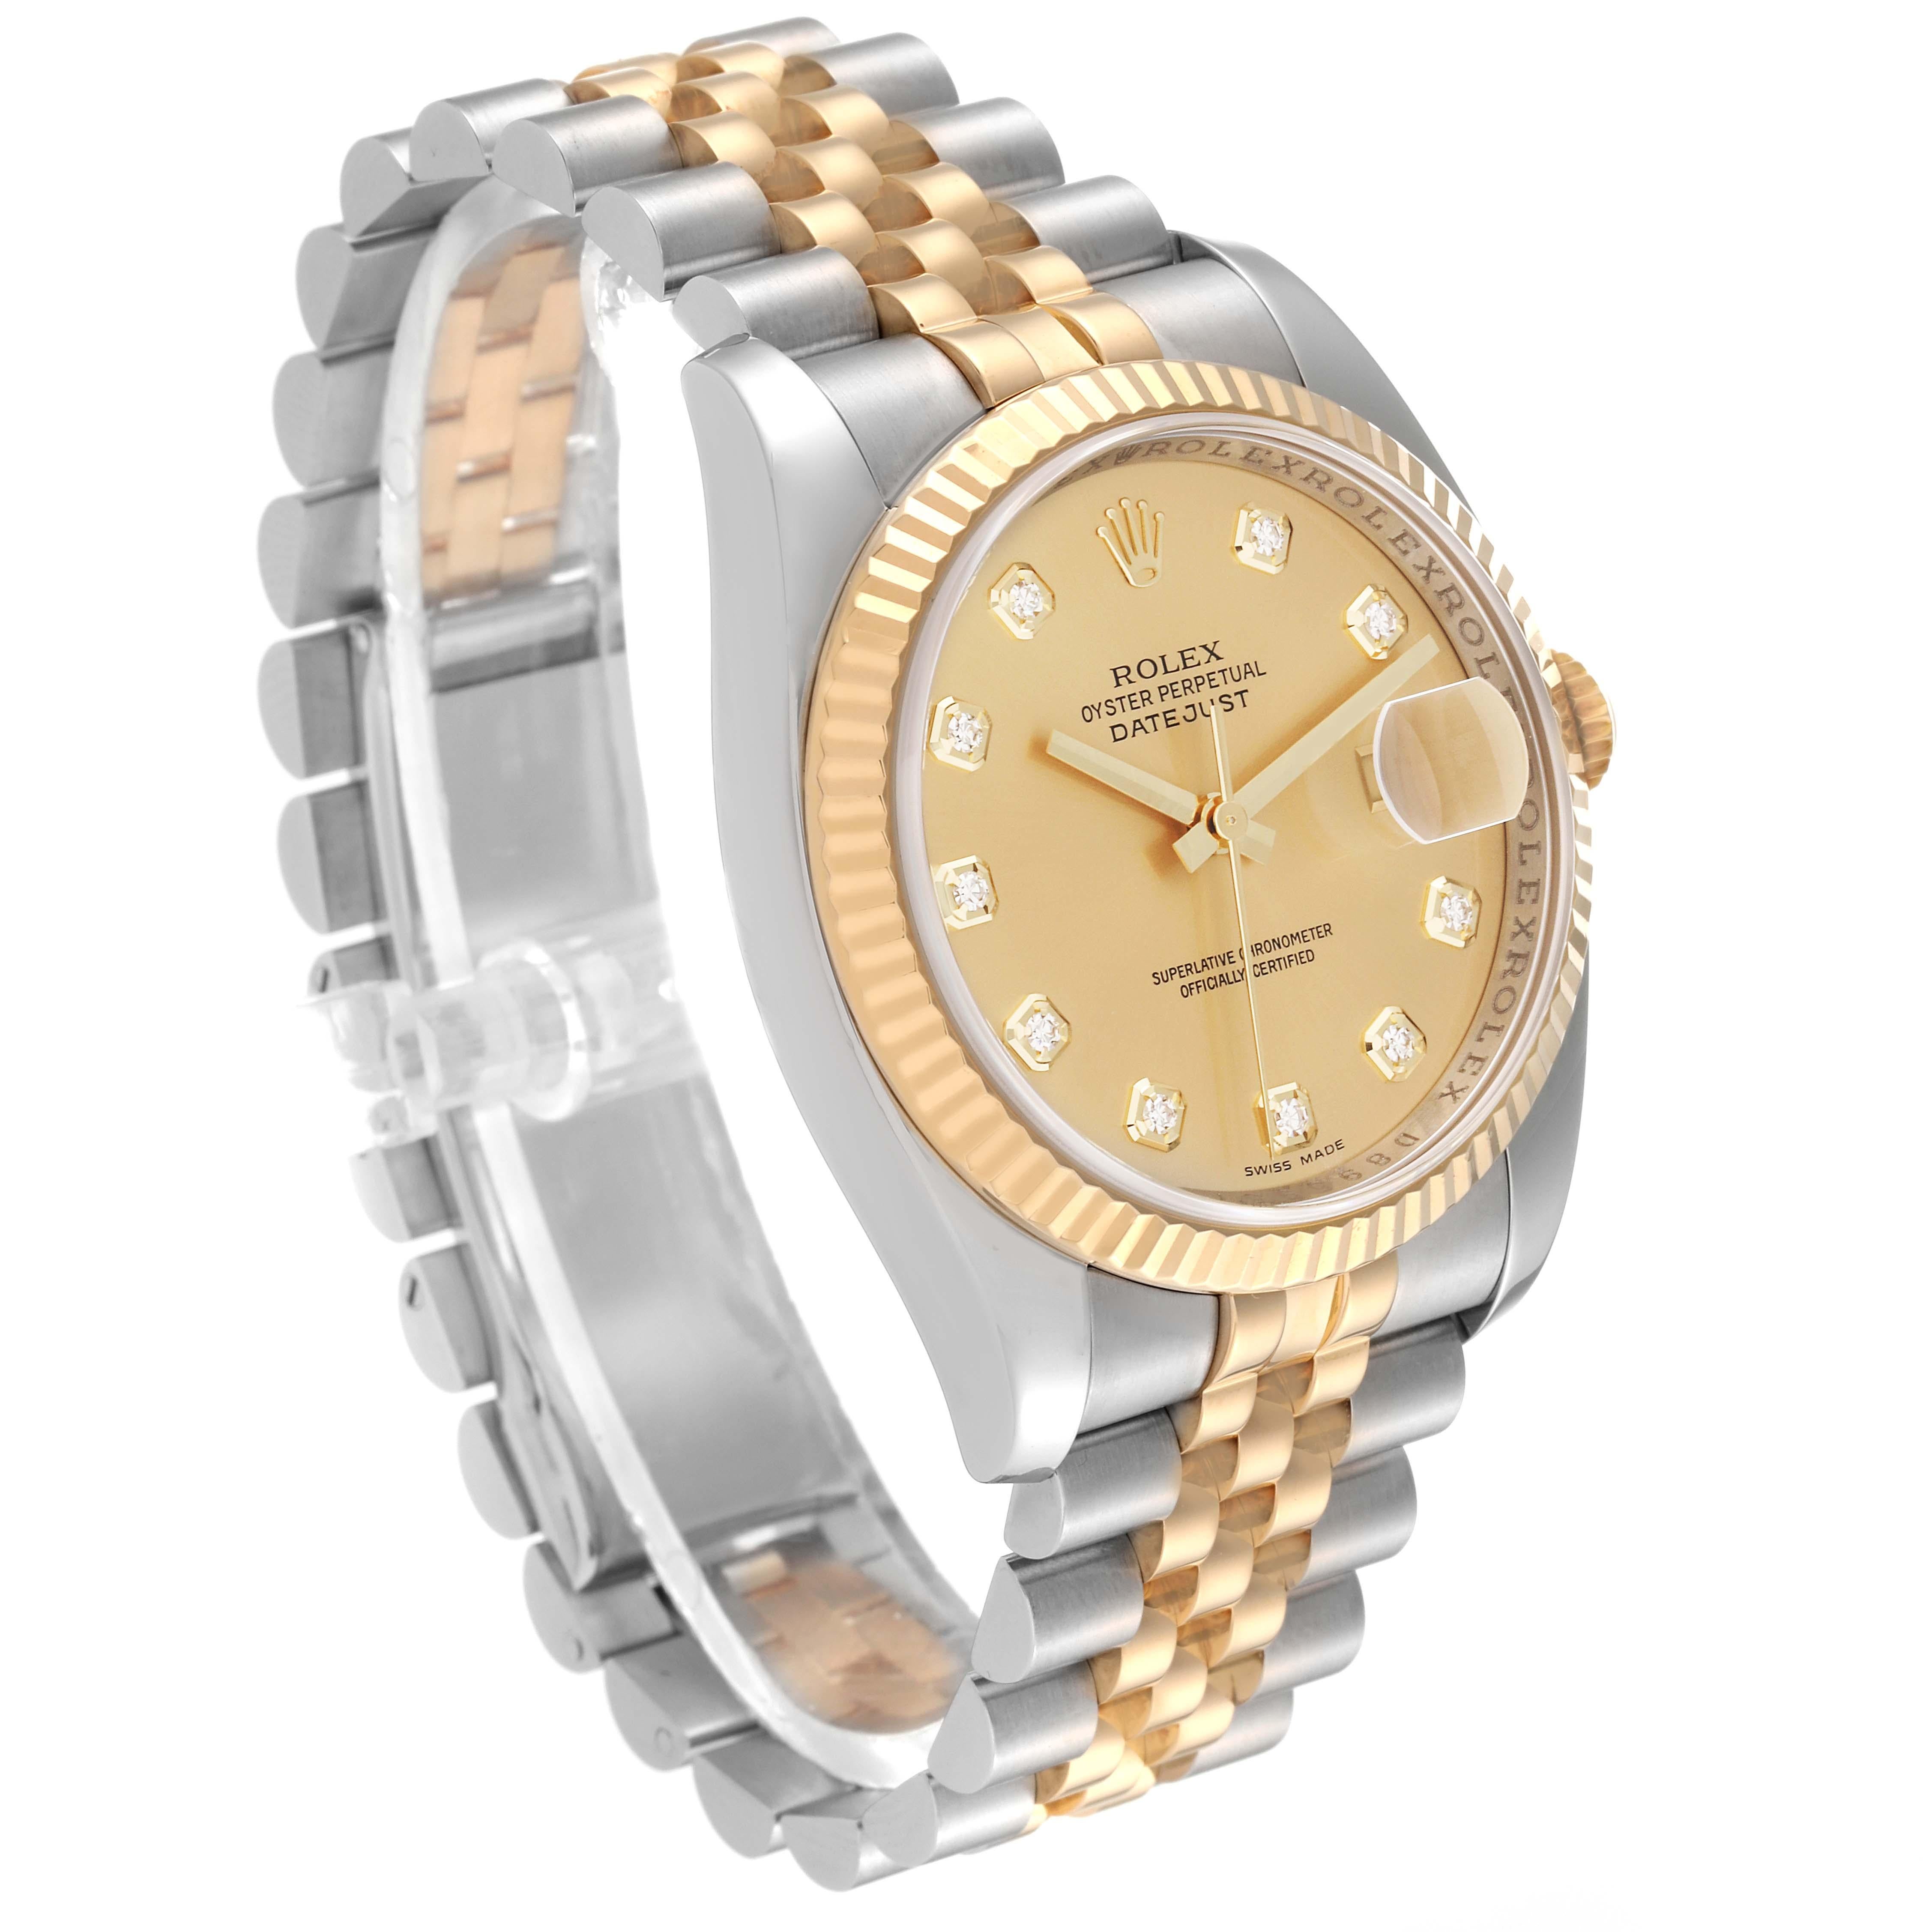 Rolex Datejust Steel Yellow Gold Champagne Diamond Dial Mens Watch 116233 For Sale 5